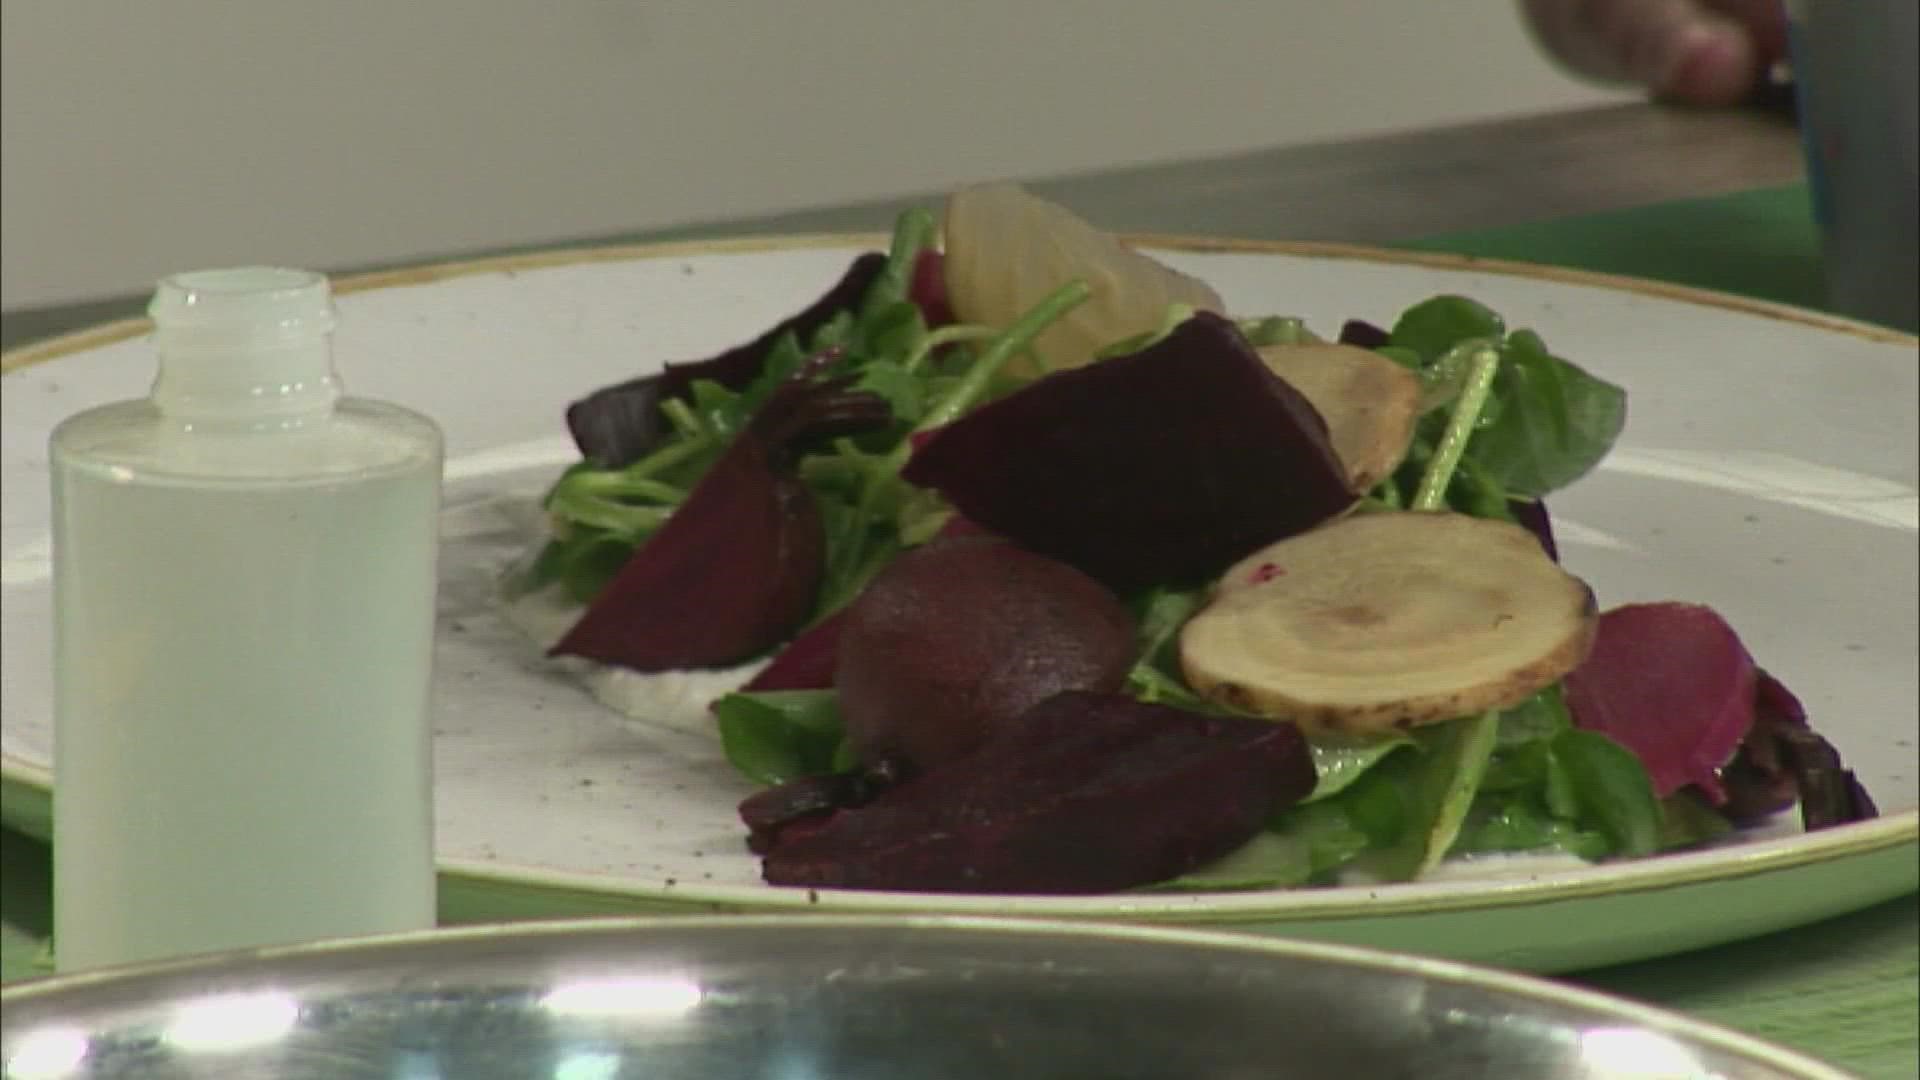 Chef Gil Plaster from The Tiller at Cliff House Maine joins us with his recipe for beet salad.